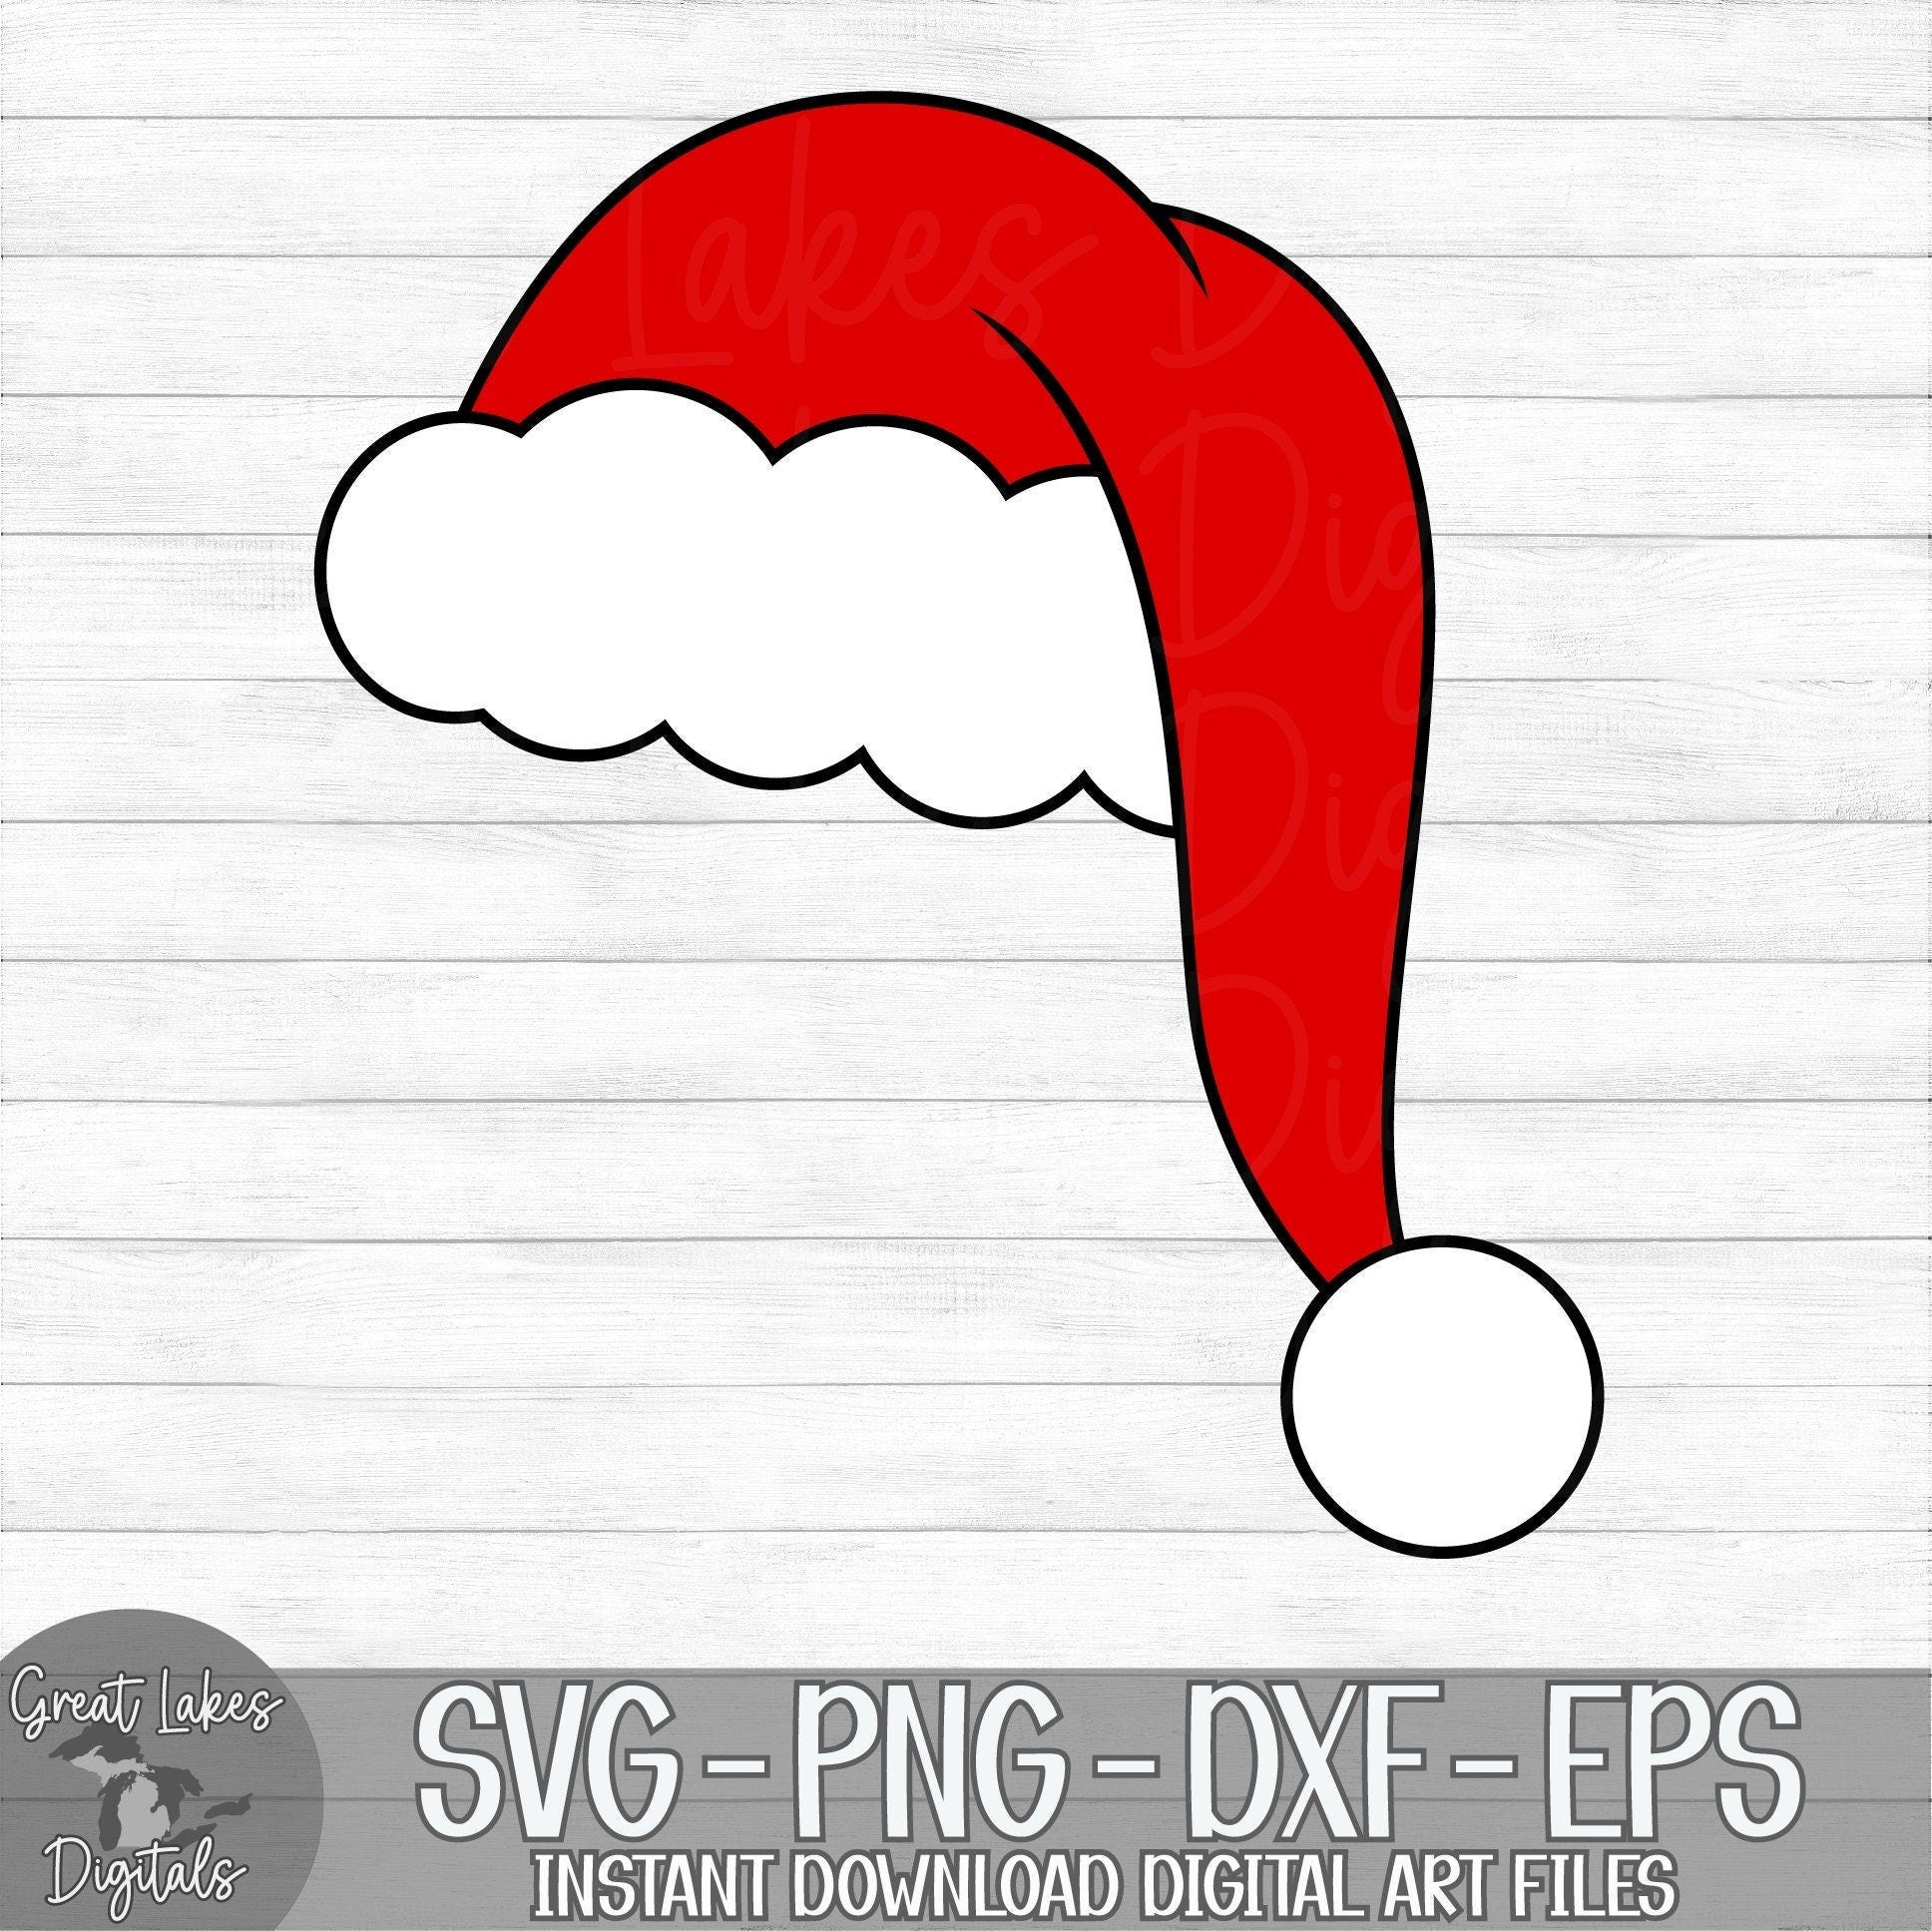 Santa Hat - Instant Digital Download - svg, png, dxf, and eps files included! Christmas, Santa Clause, Santa